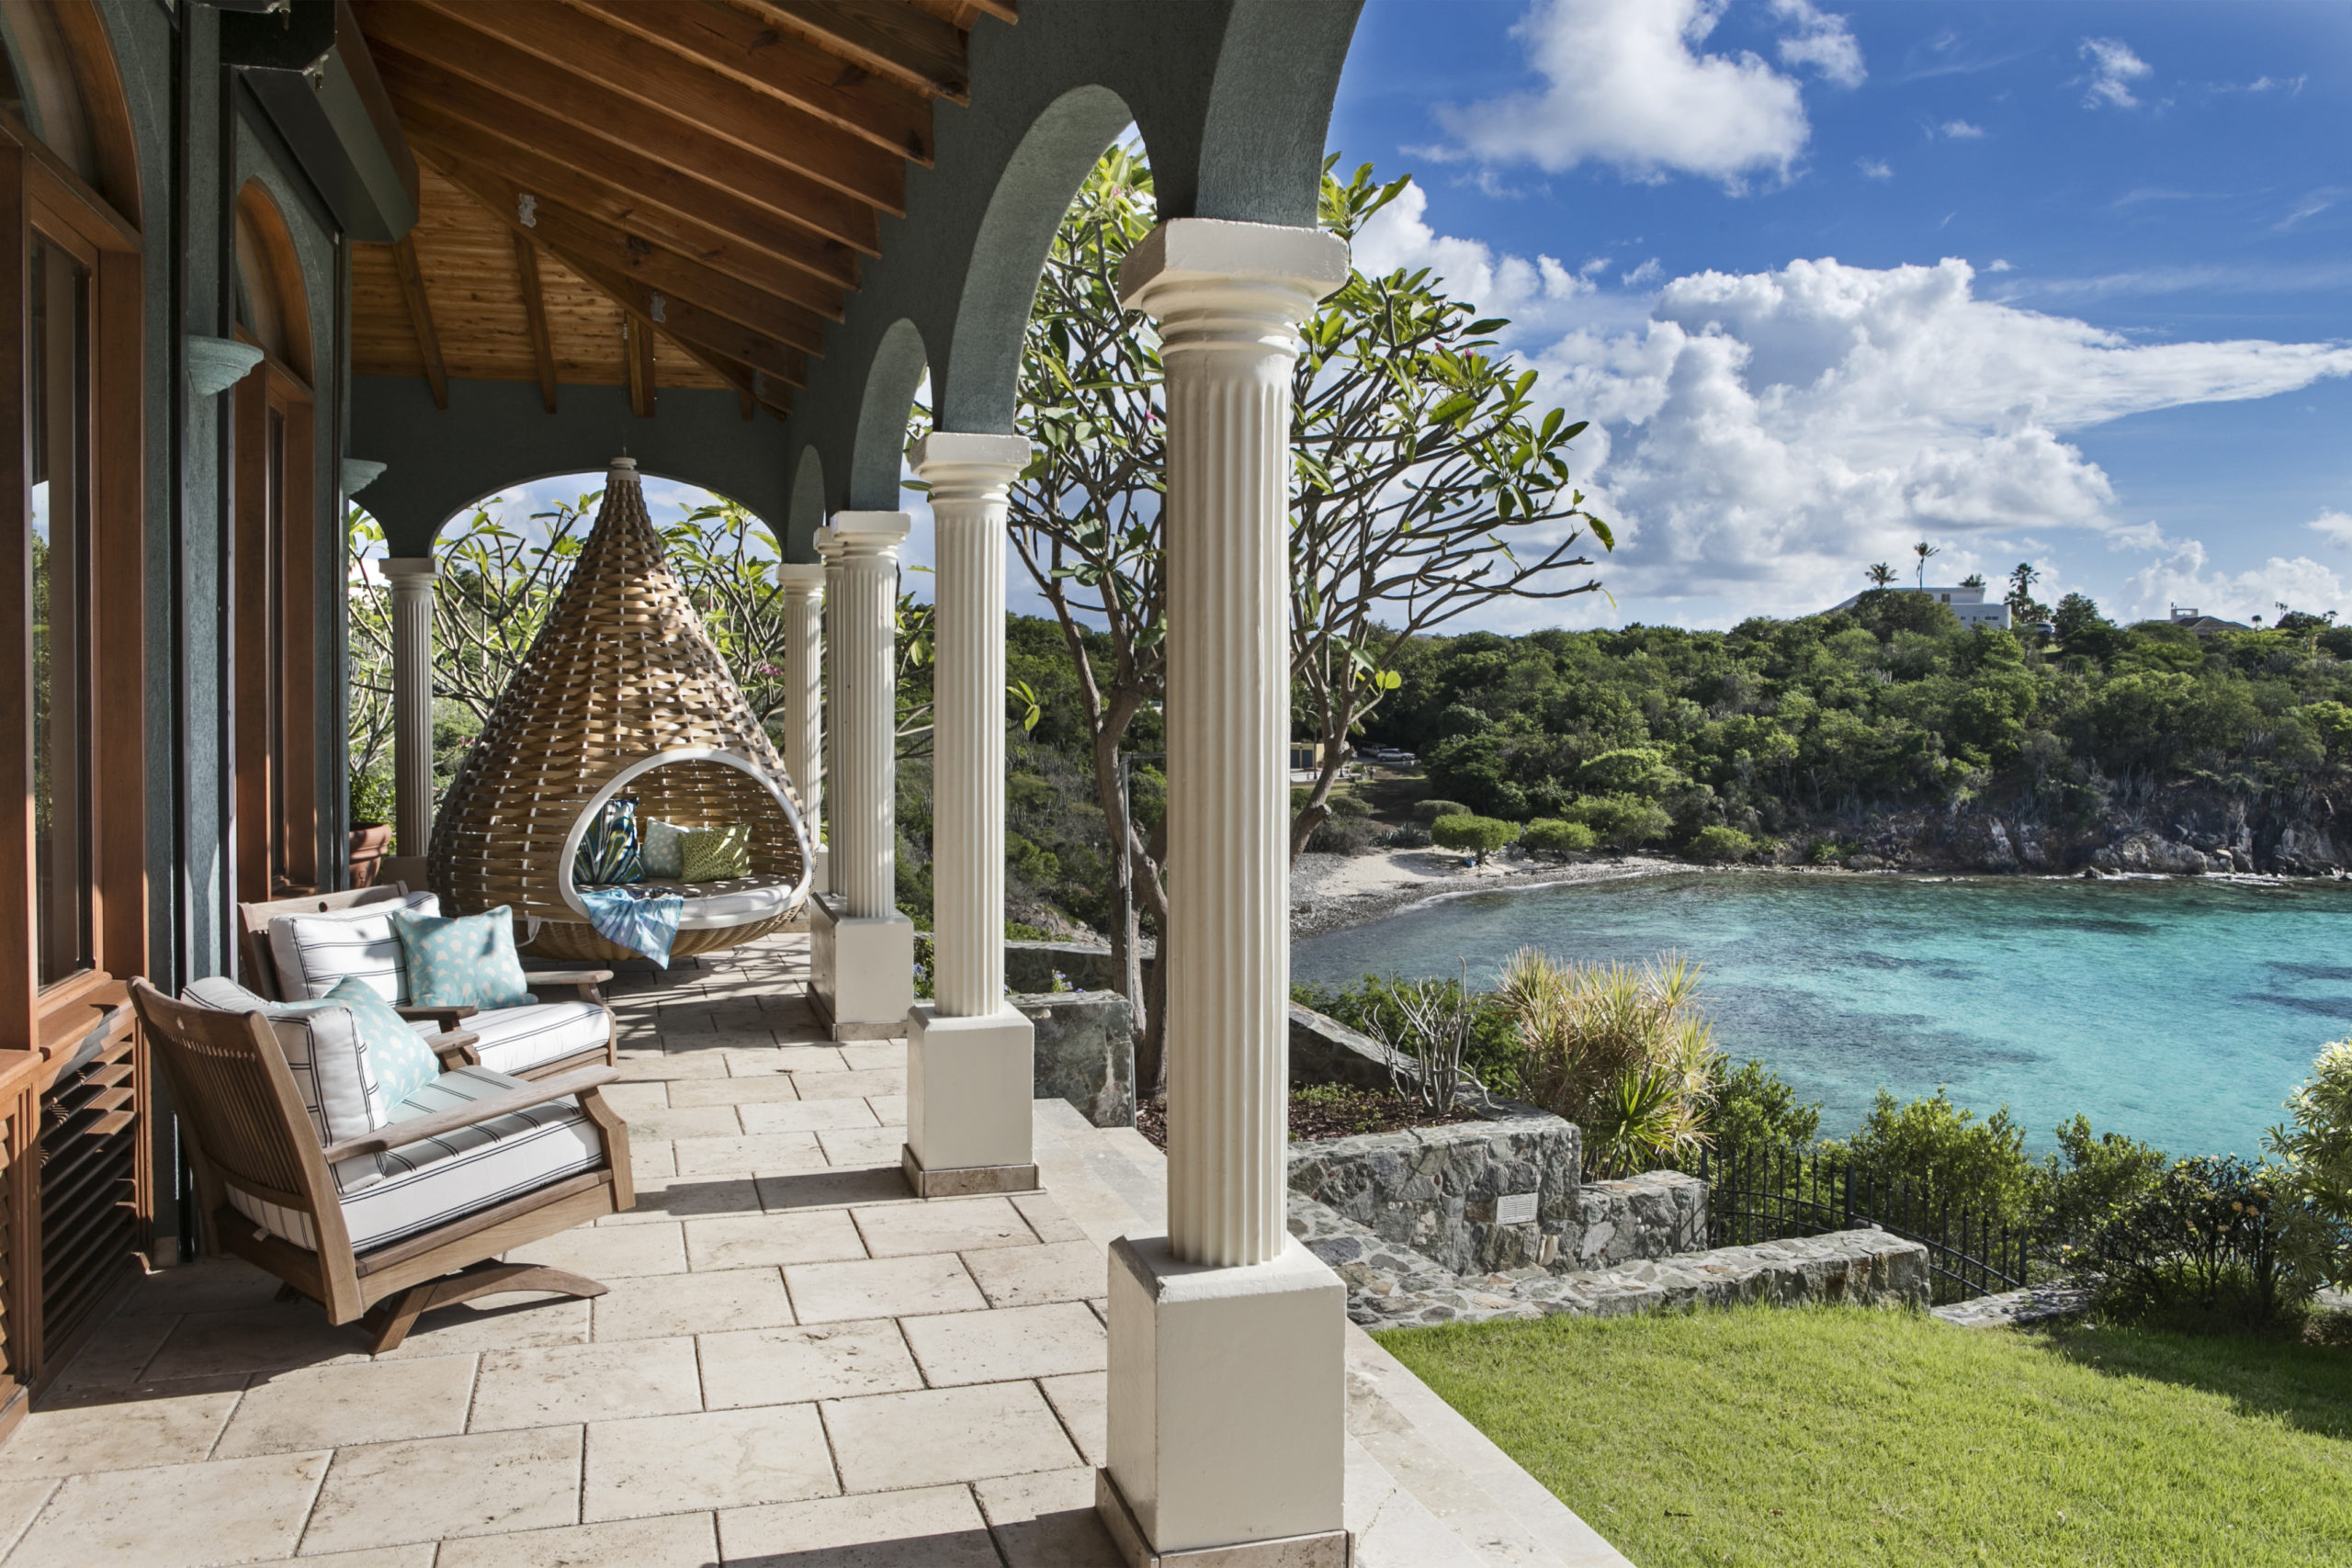 Beautiful porch in the caribbean complete with a hangning birdsnest daybed and views of the ocean.